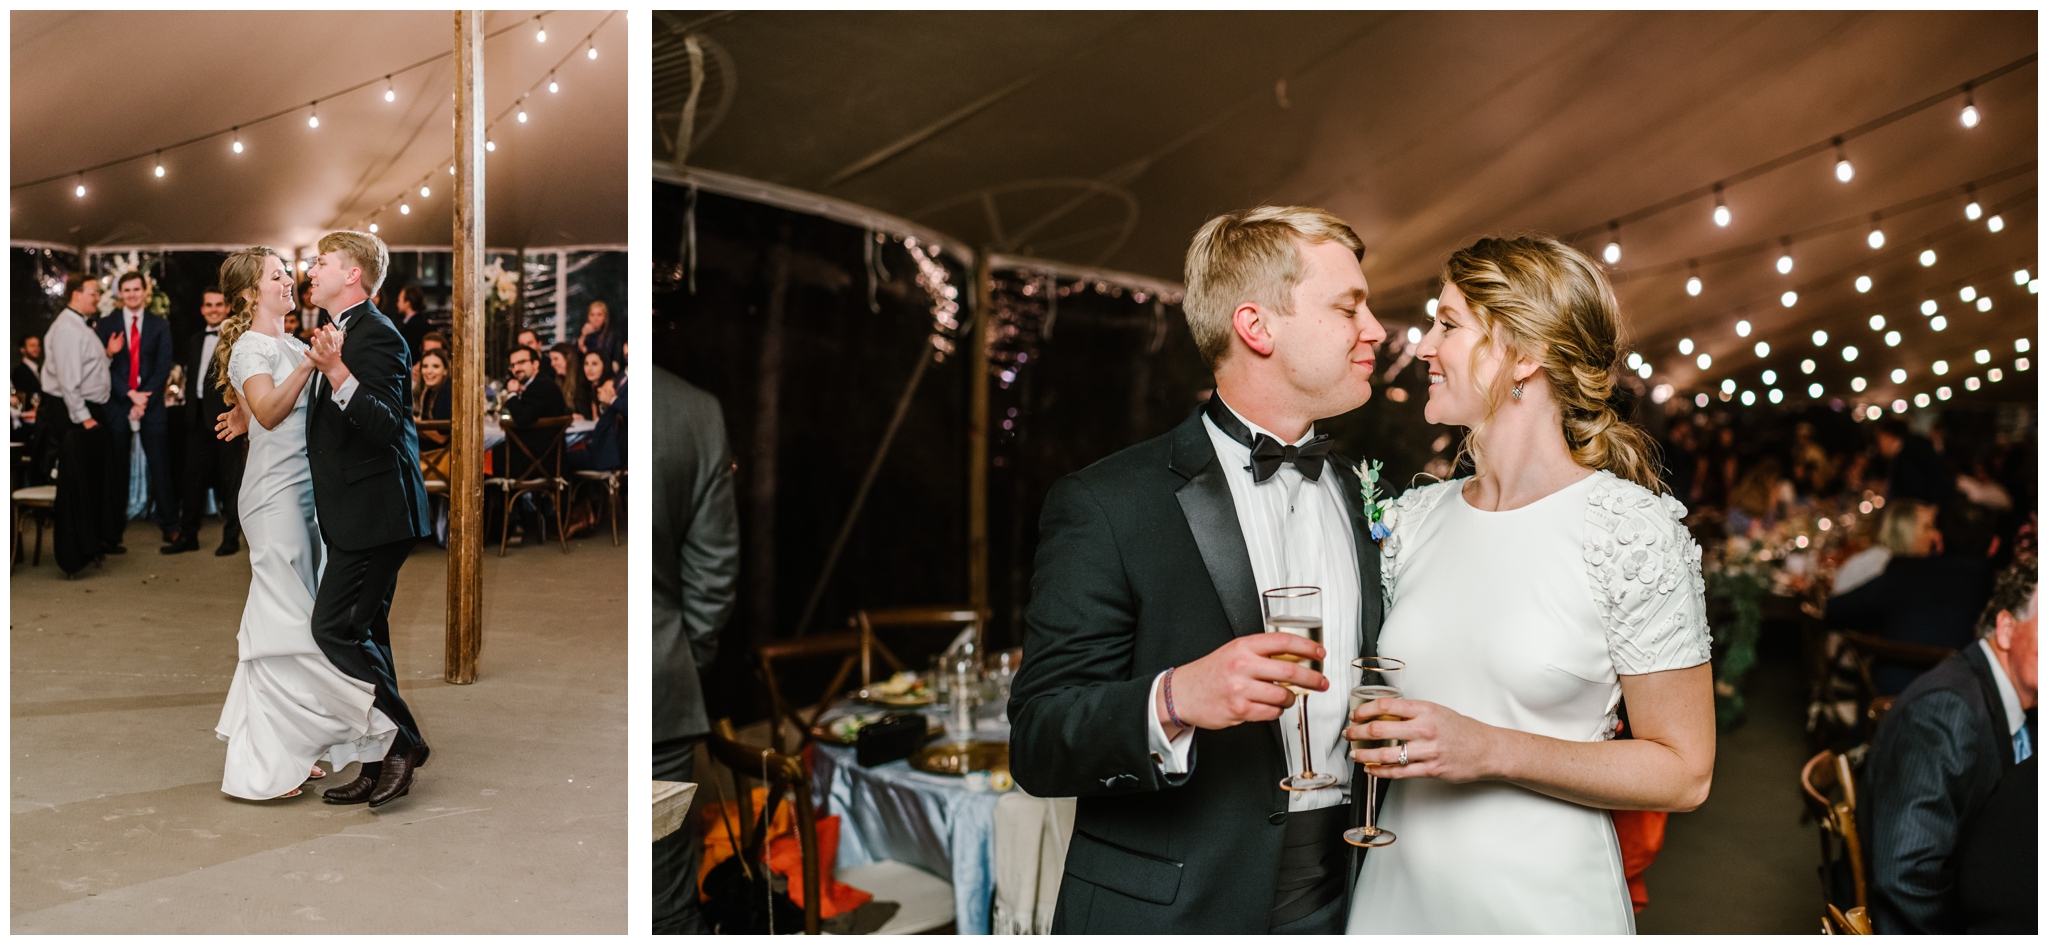 Fall wedding reception at The Greenhouse at Driftwood in Austin Texas | Joslyn Holtfort Photography